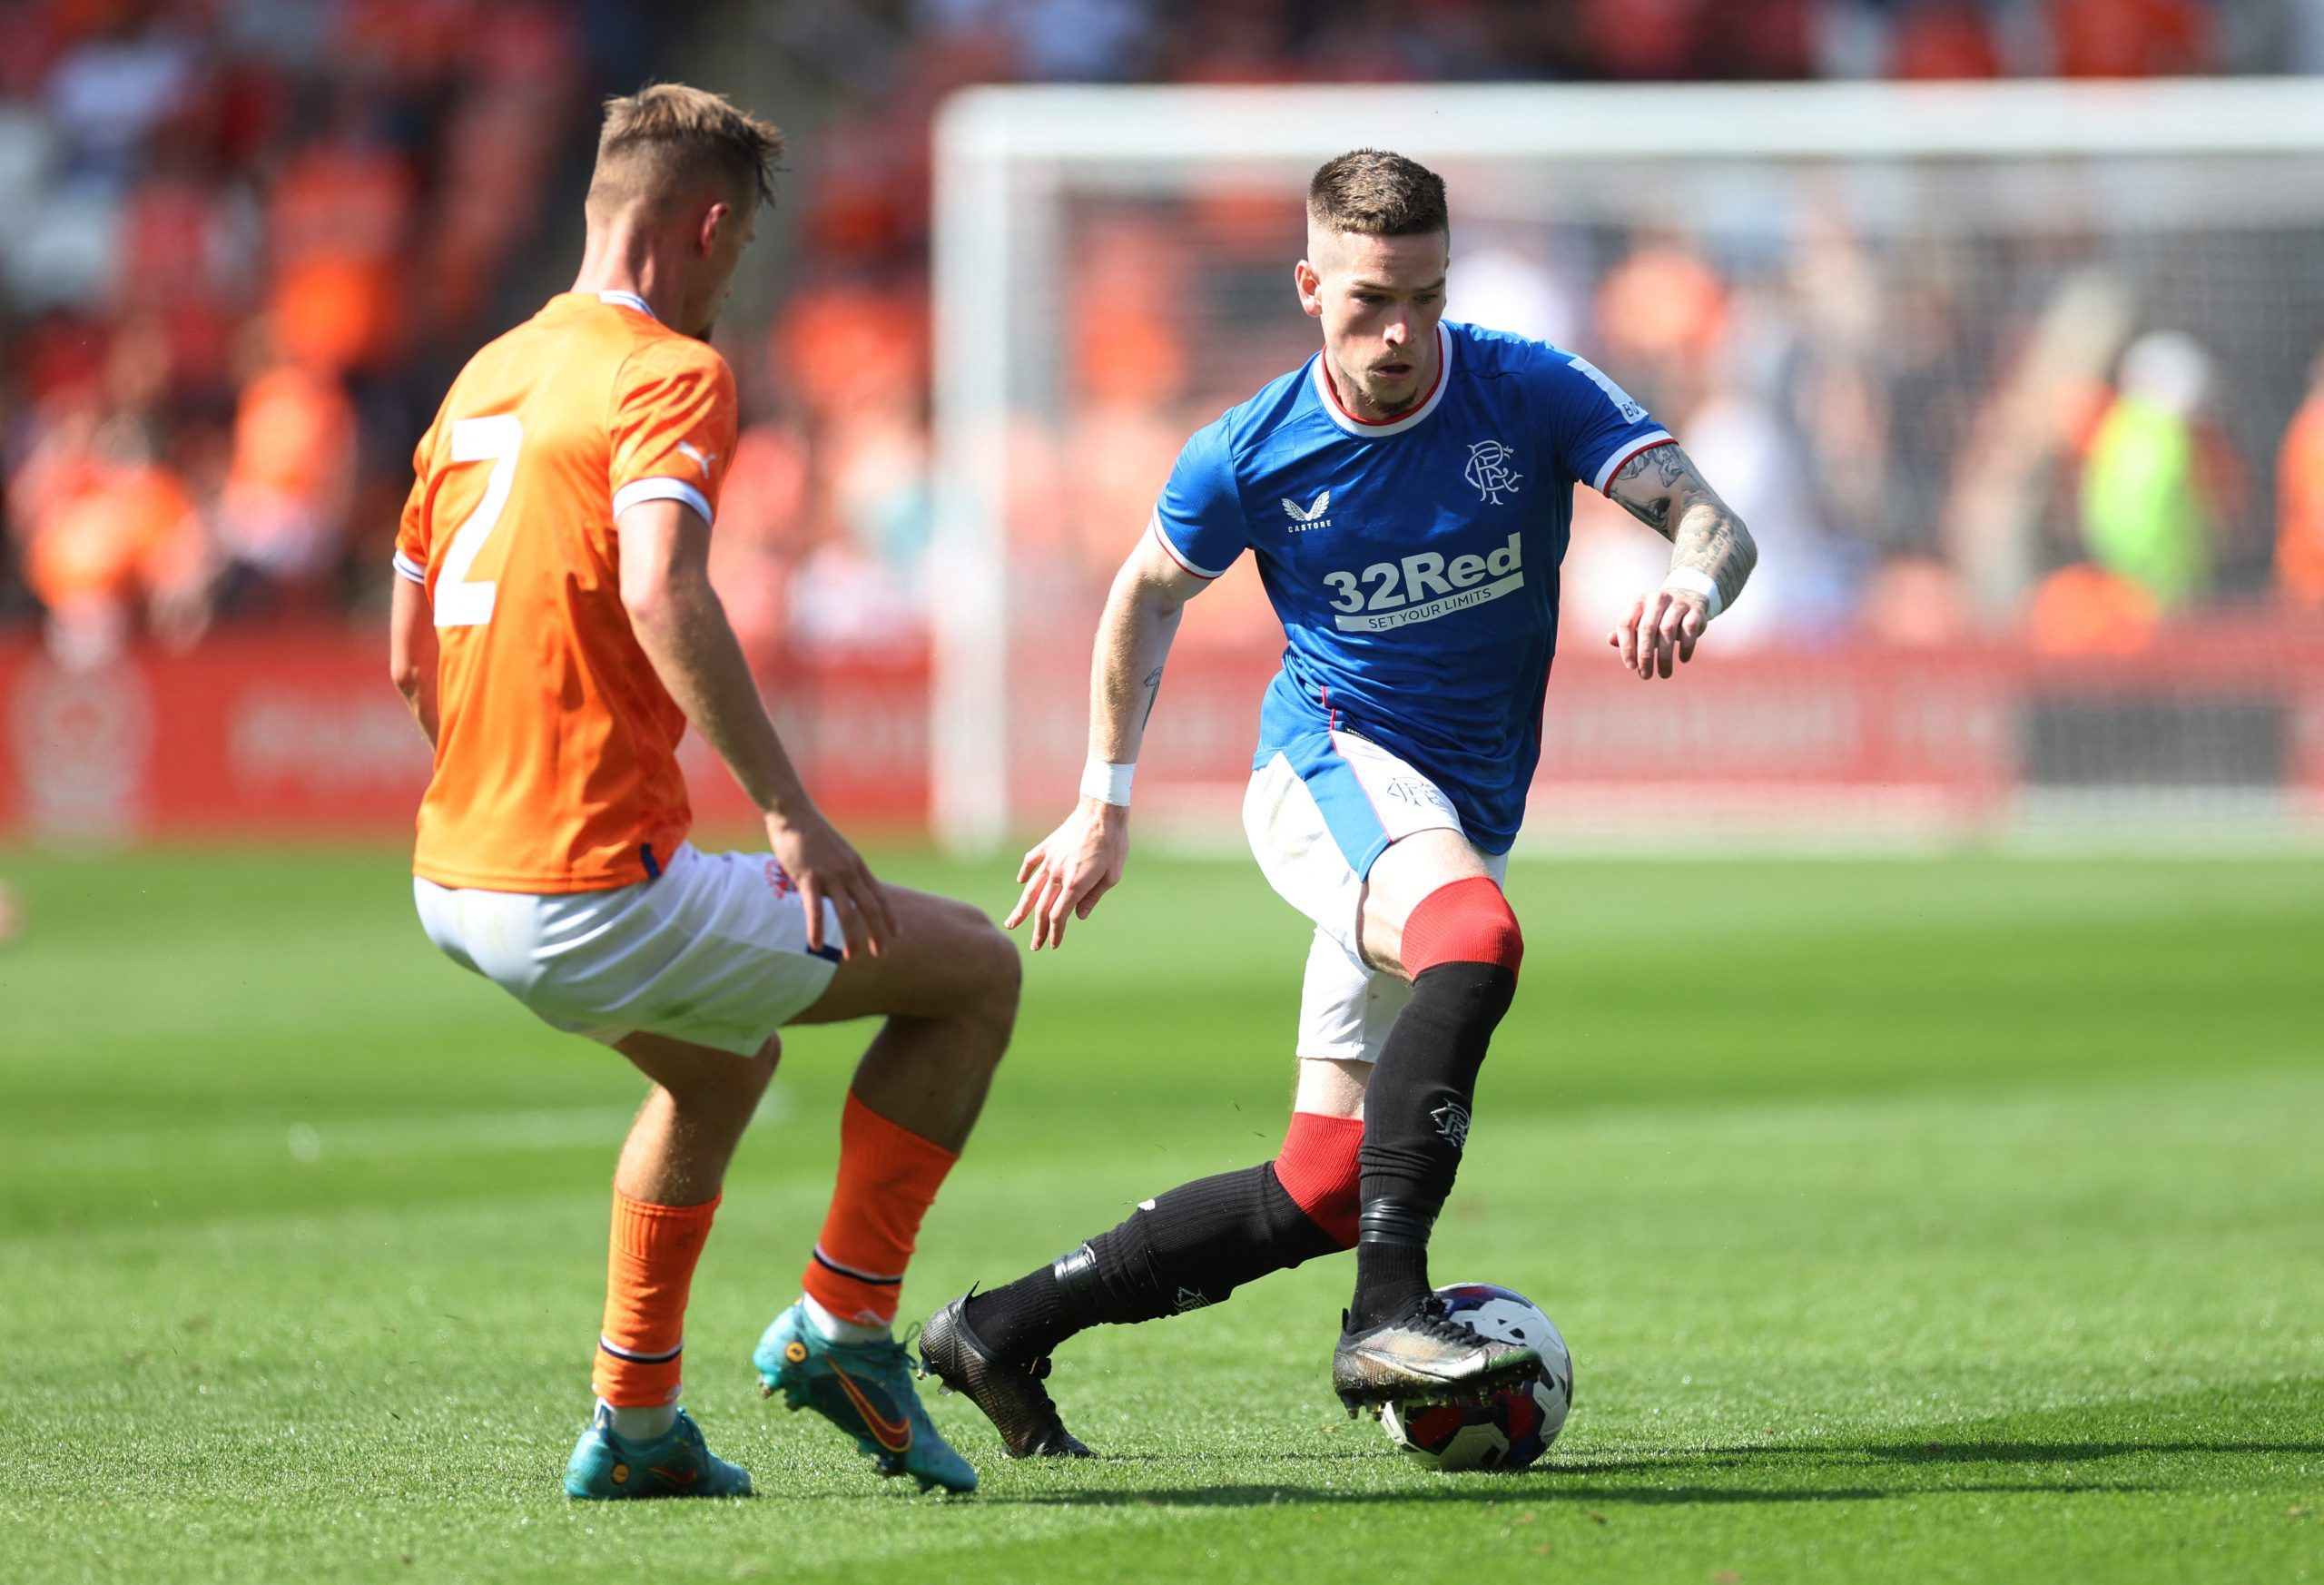 Soccer Football - Pre Season Friendly - Blackpool v Rangers - Bloomfield Road, Blackpool, Britain - July 16, 2022 Rangers' Ryan Kent in action with Blackpool's Callum Connolly Action Images via Reuters/Carl Recine